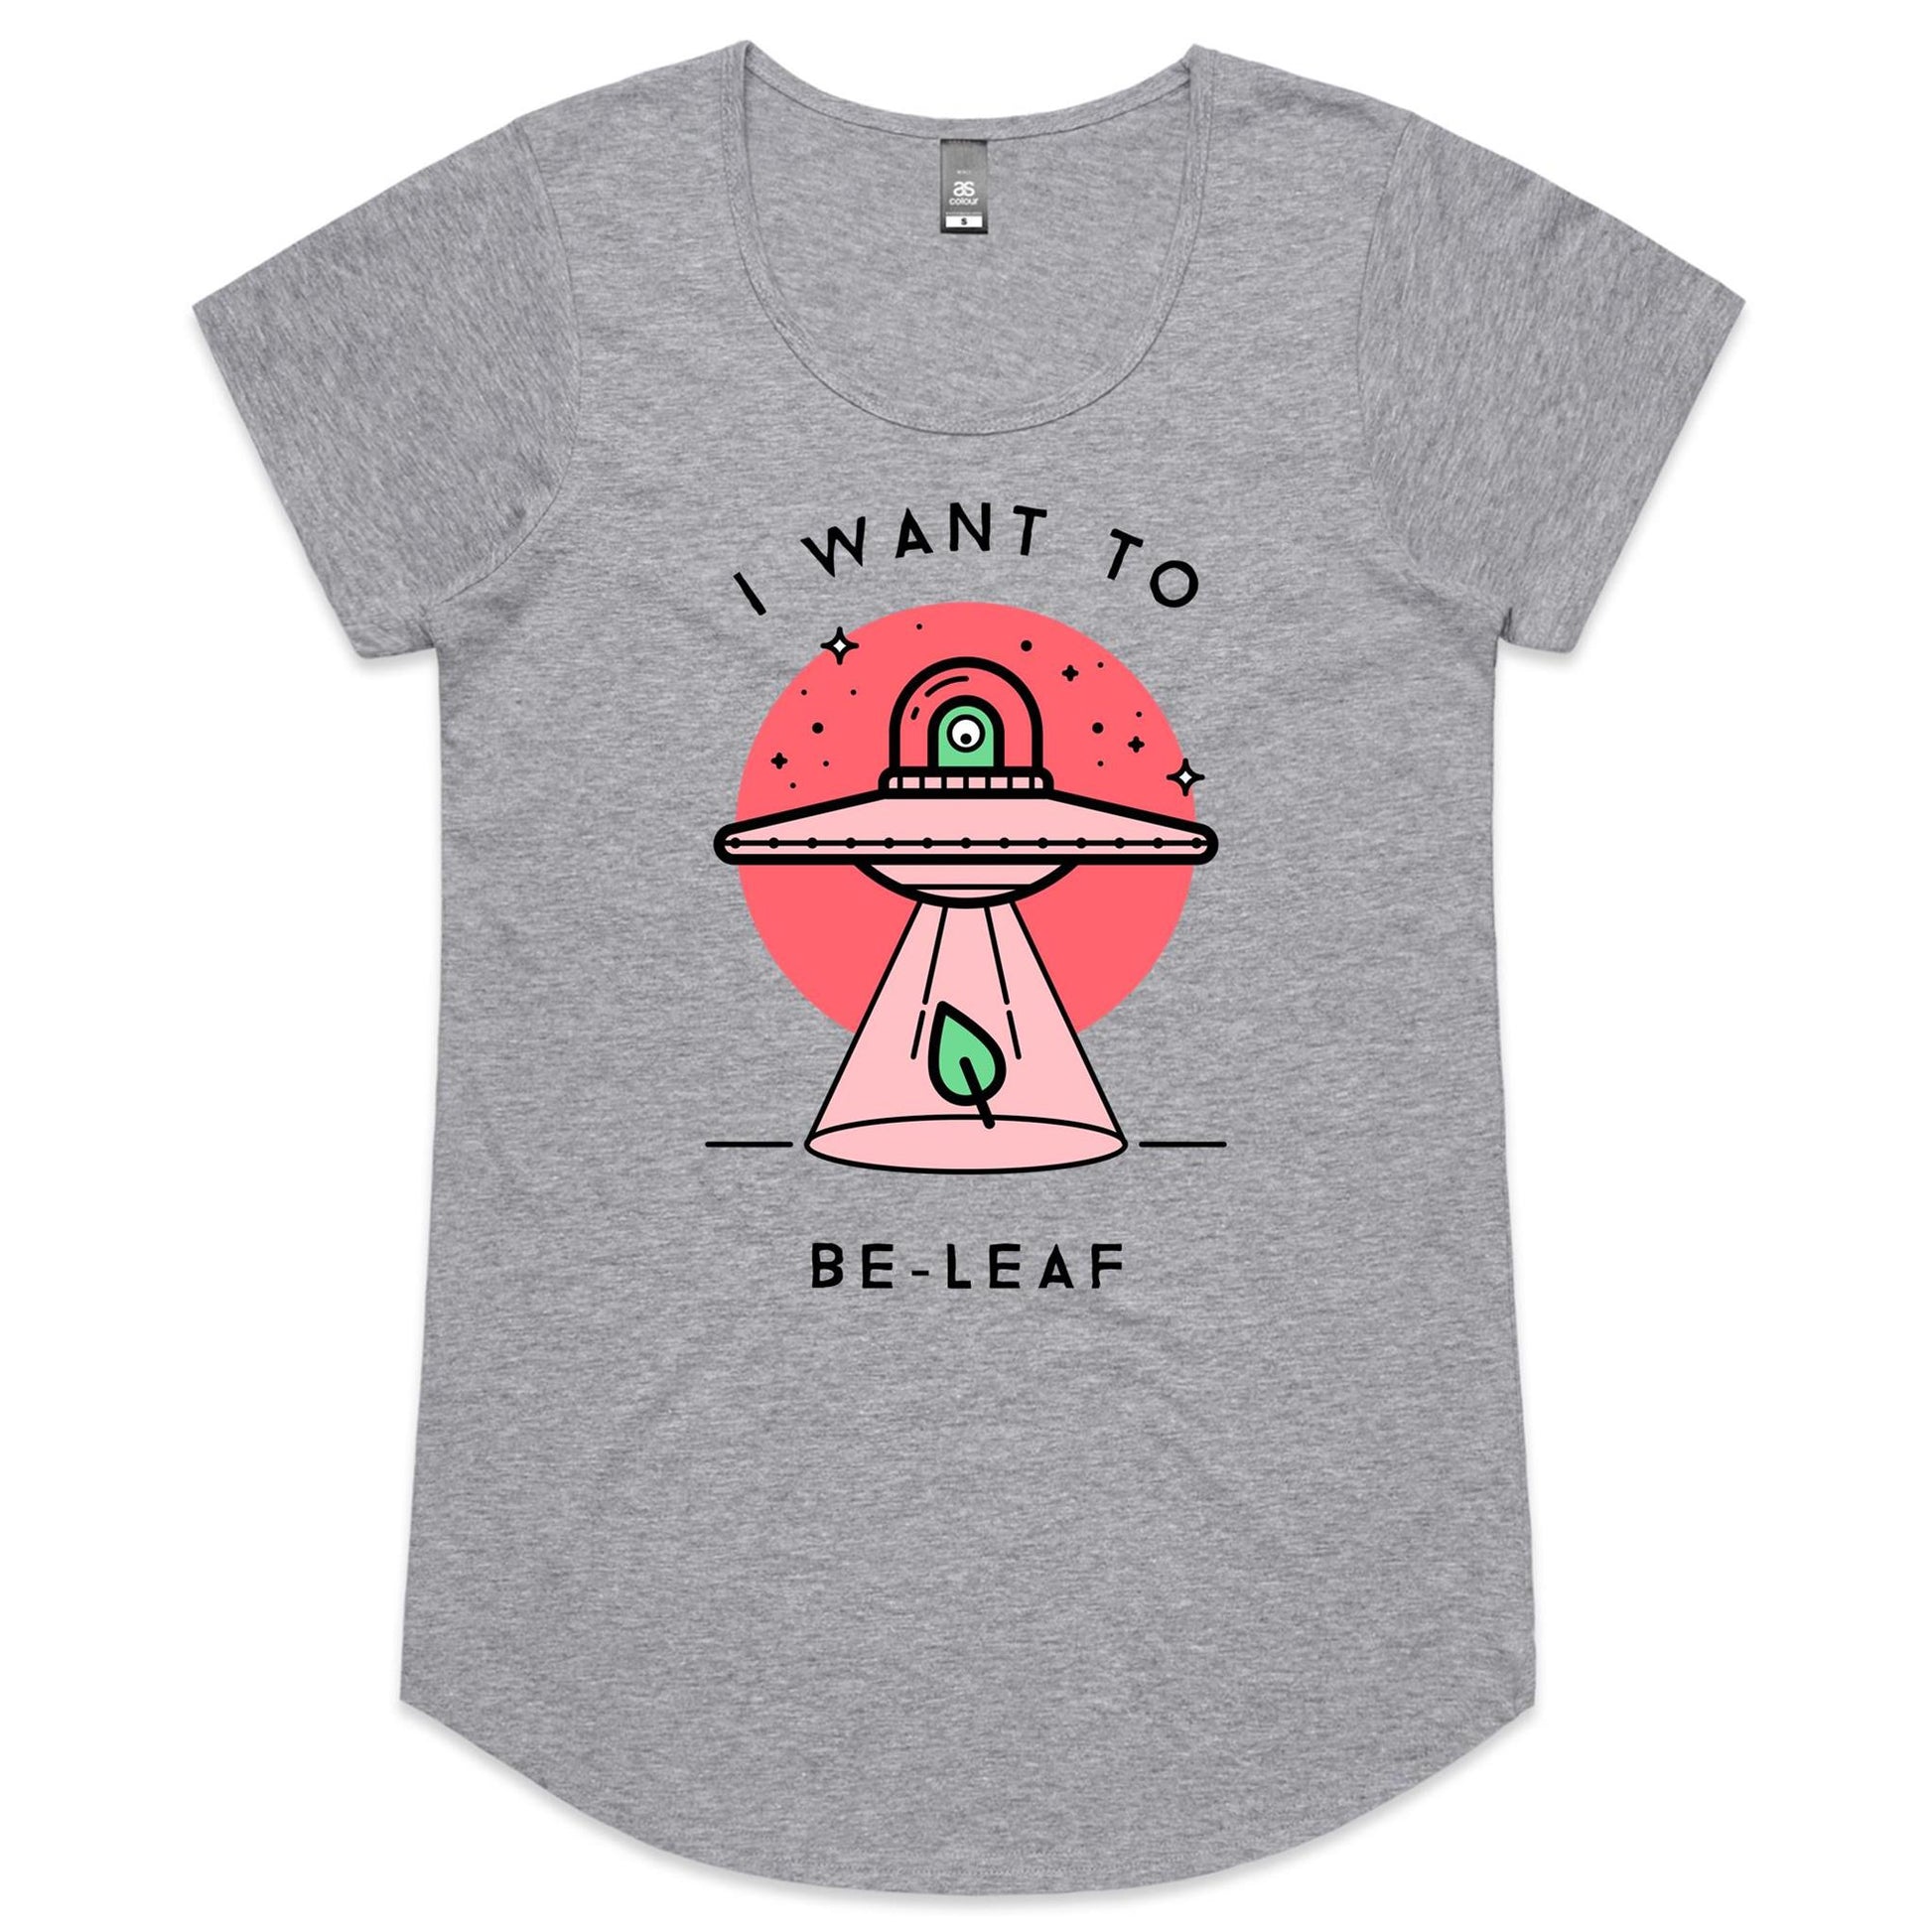 I Want To Be-Leaf, UFO - Womens Scoop Neck T-Shirt Grey Marle Womens Scoop Neck T-shirt Sci Fi